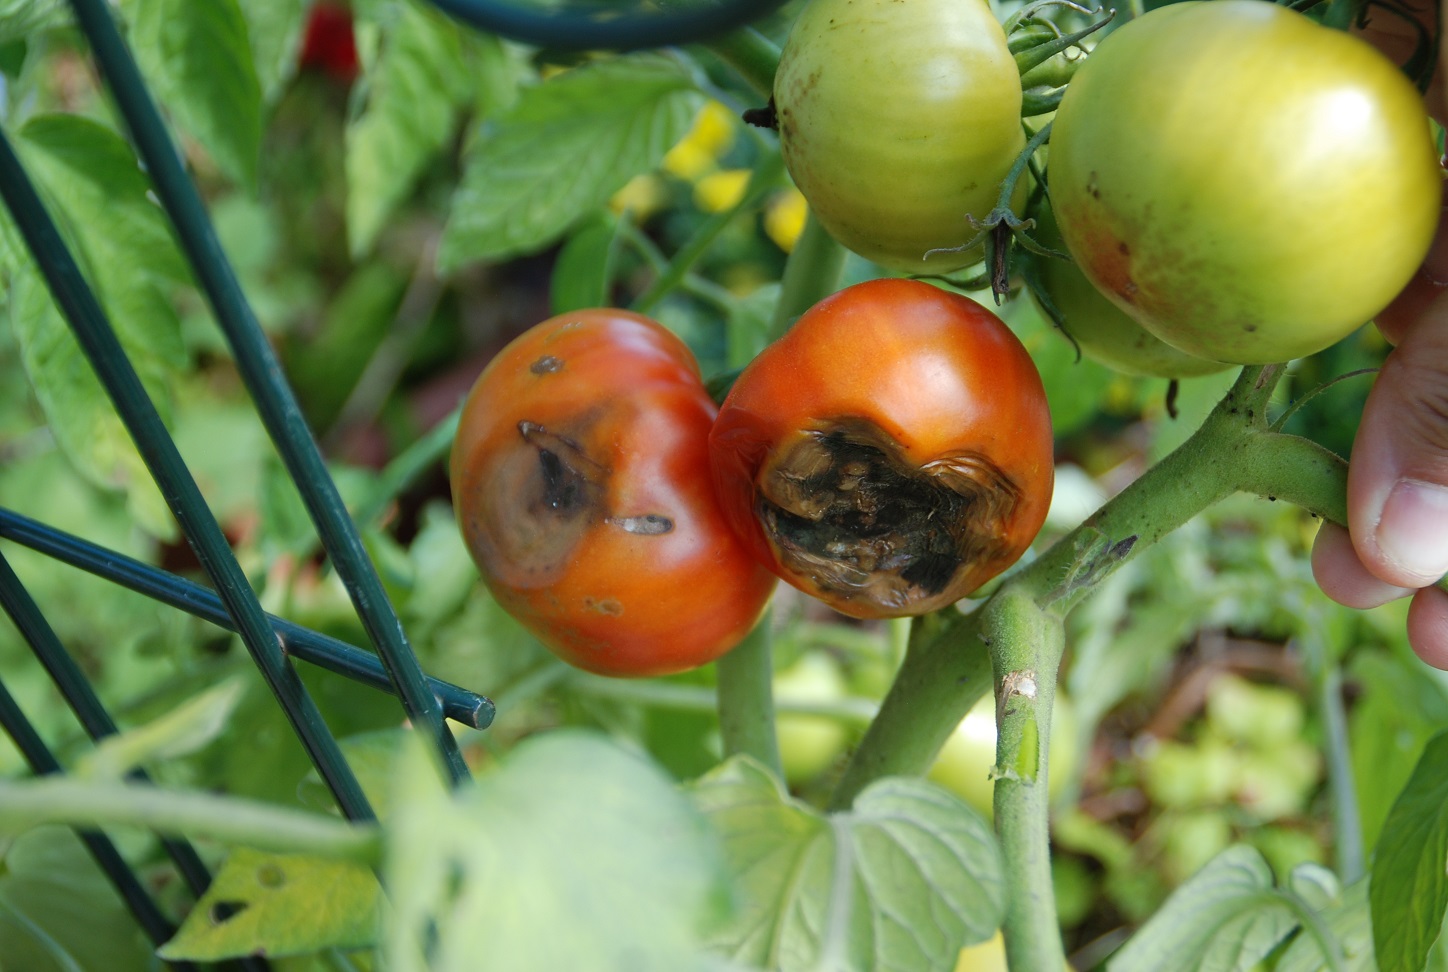 blossom-end rot on tomatoes